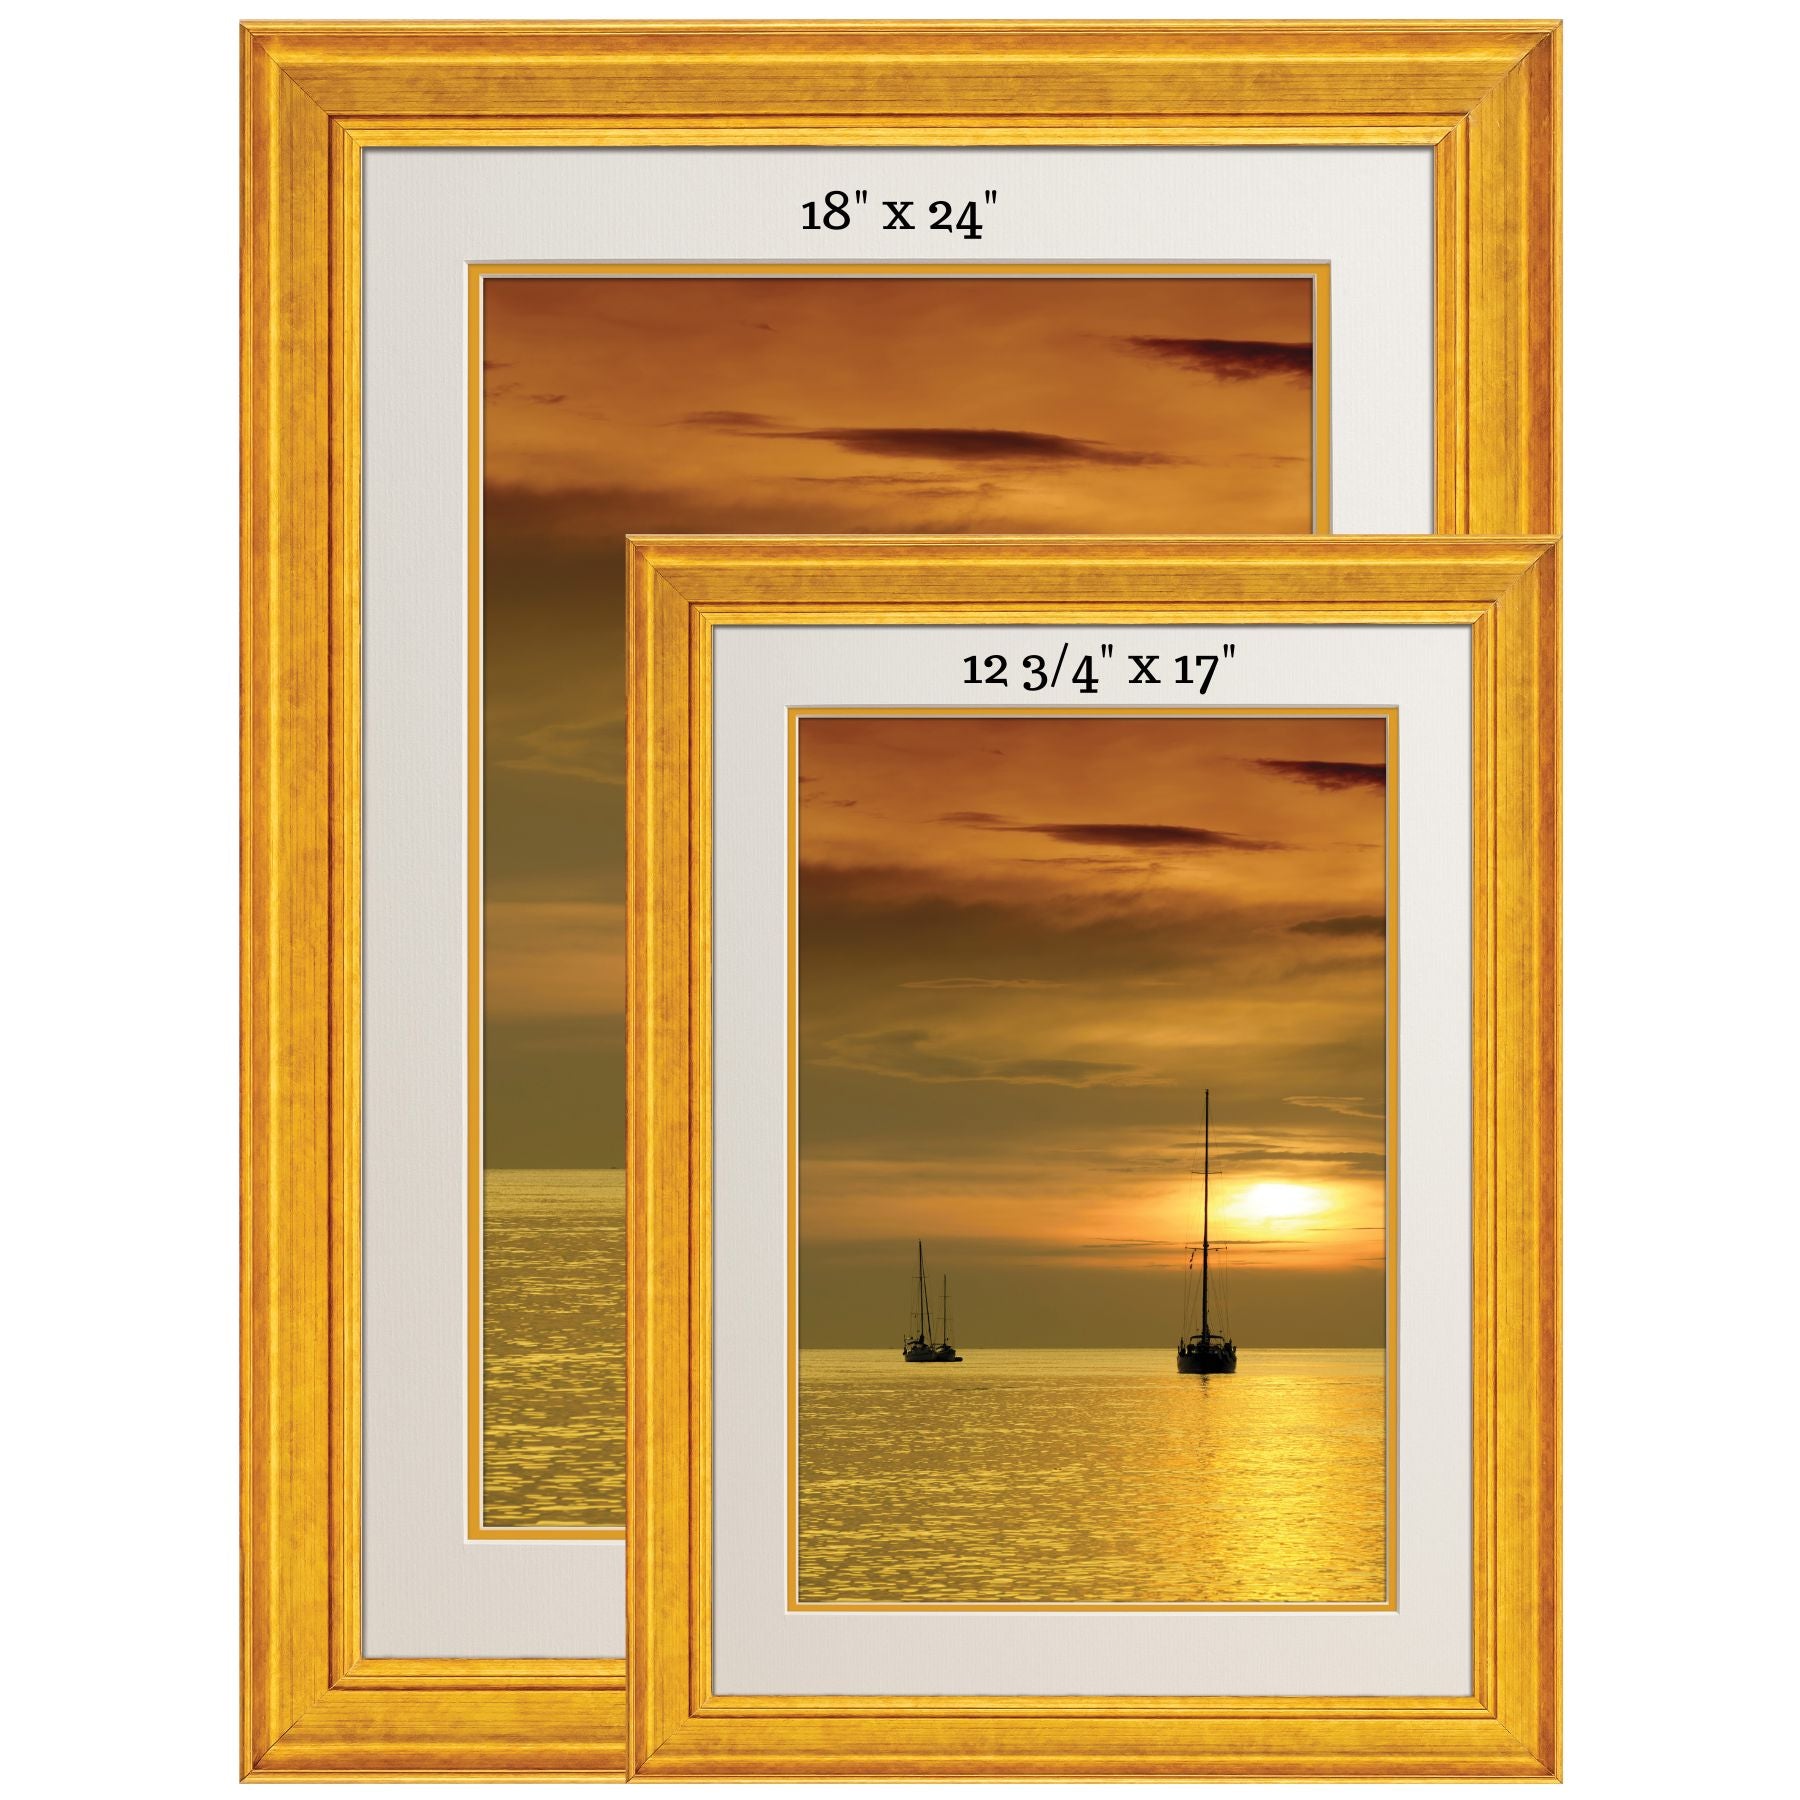 BeMoved by Sunset on Sailboats Poster. Movable and Removable!